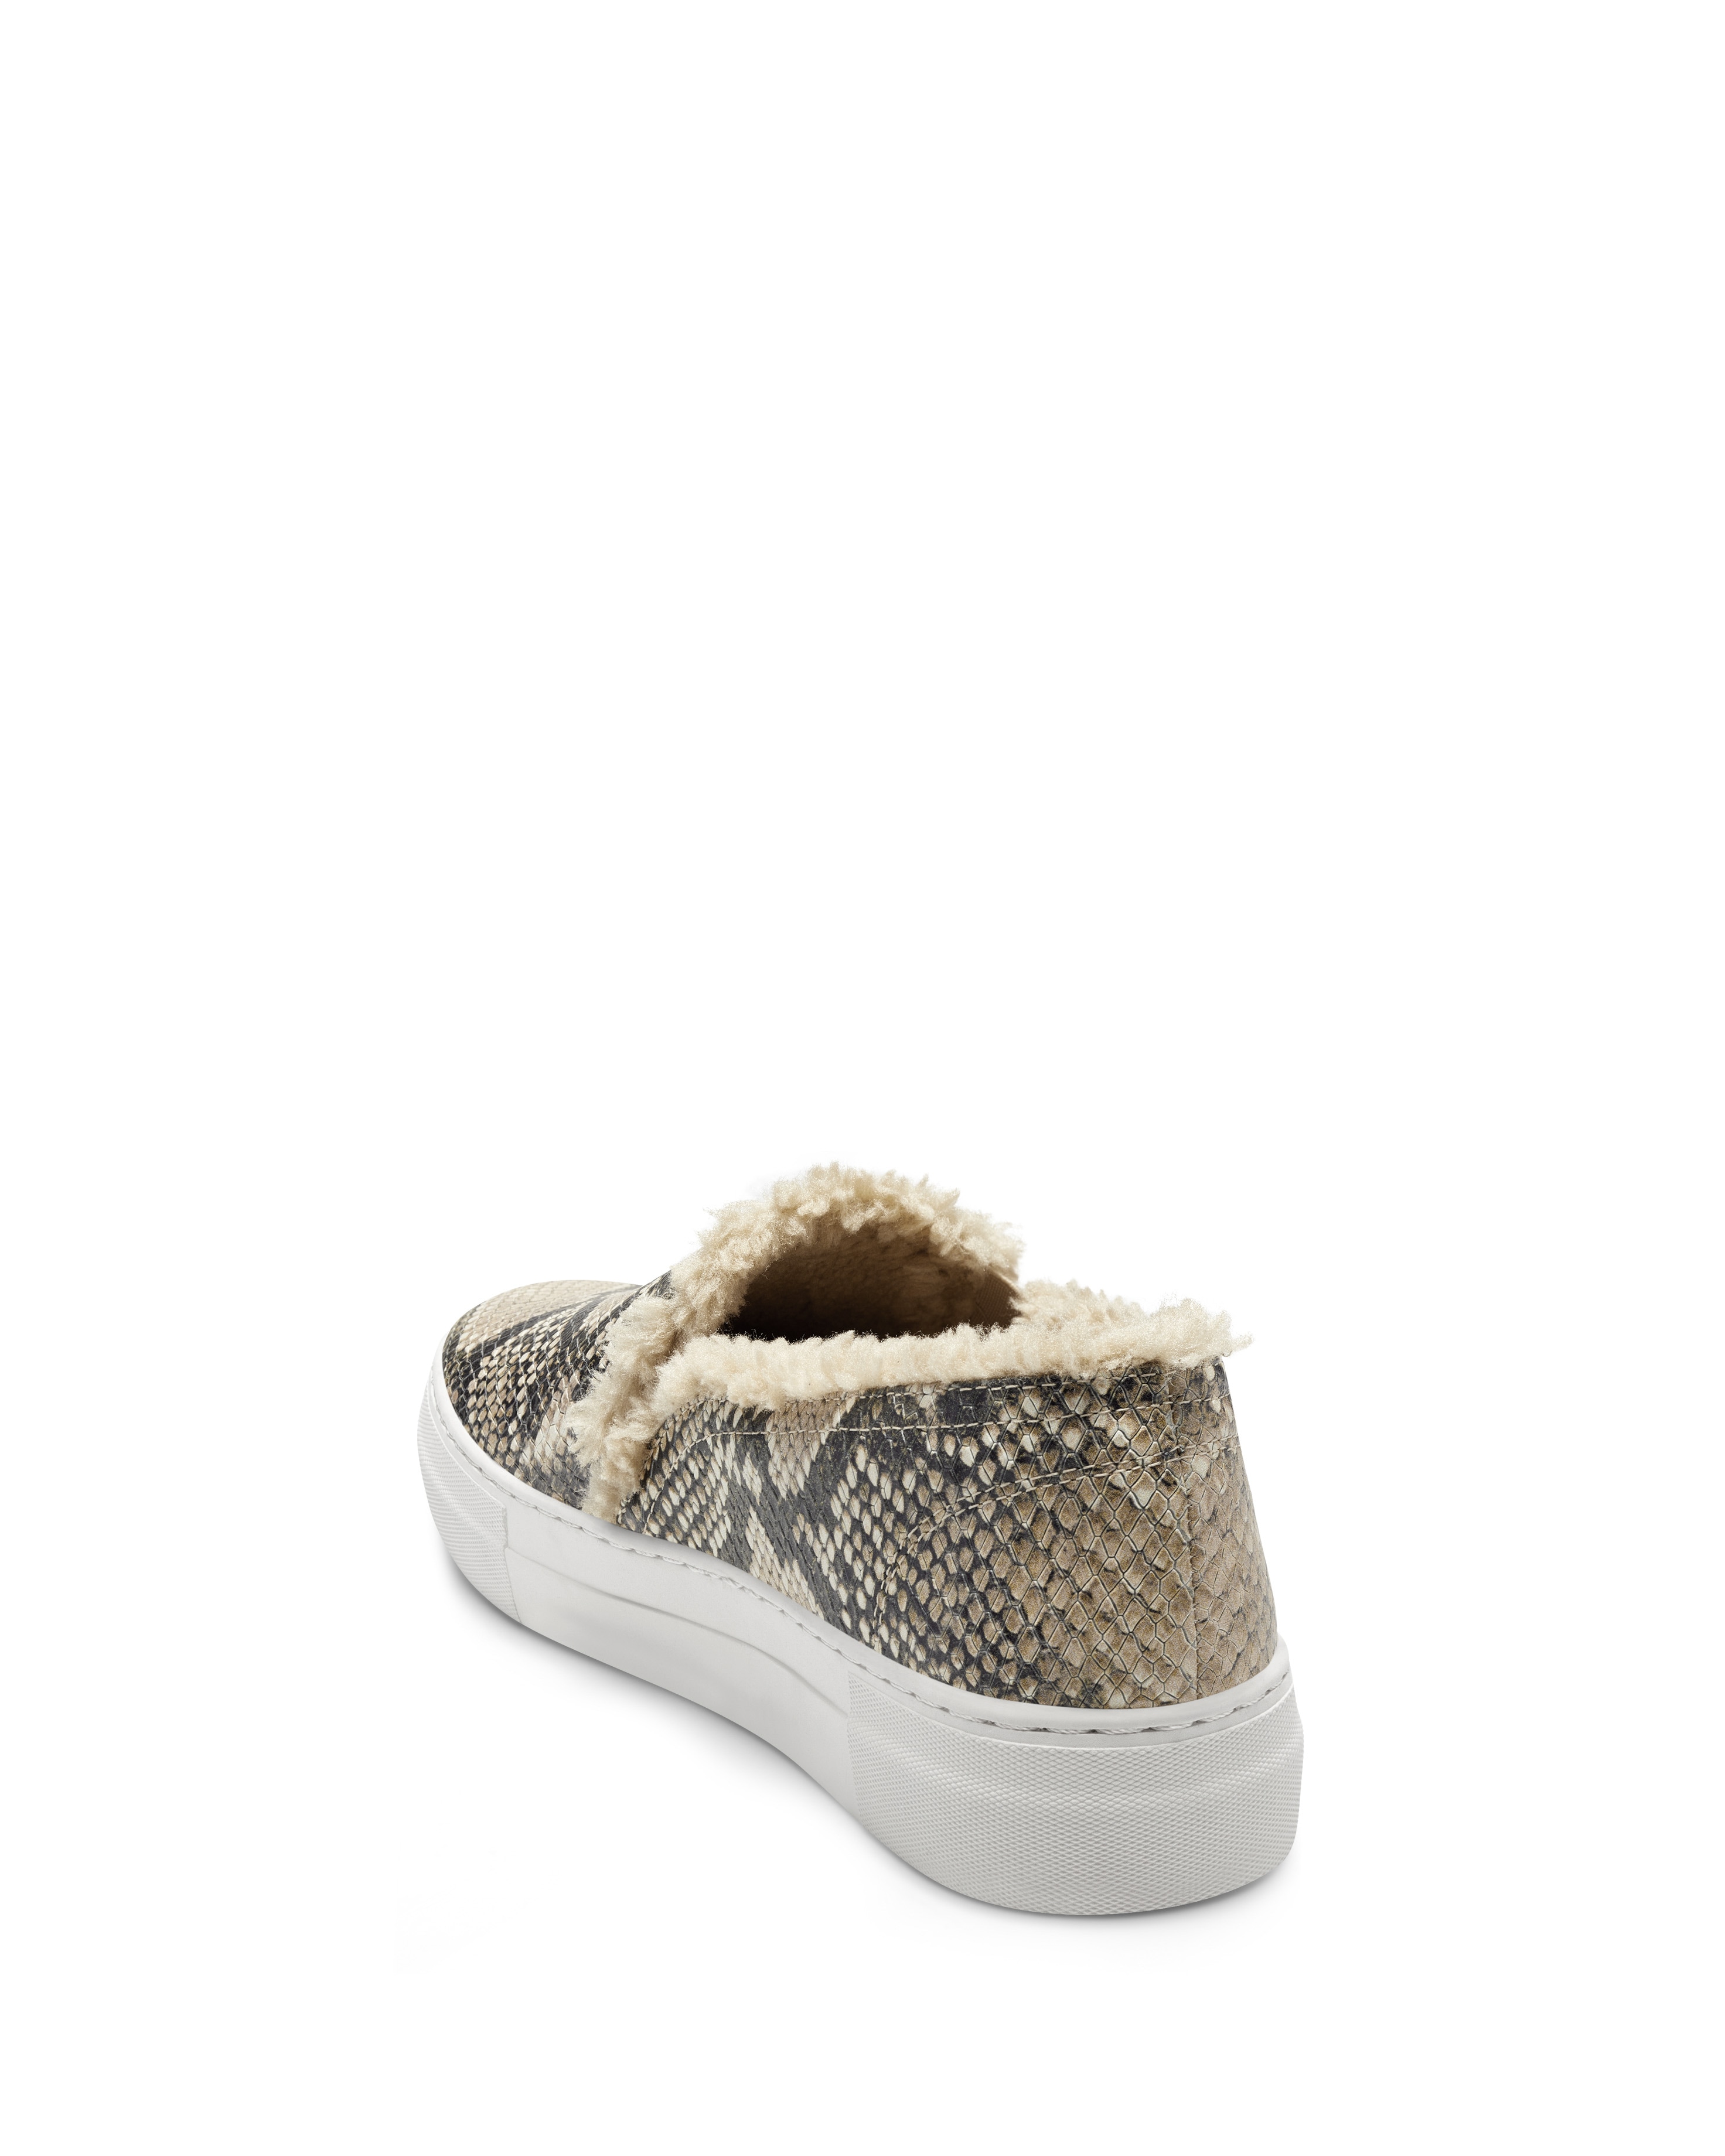 vince camuto slip ons